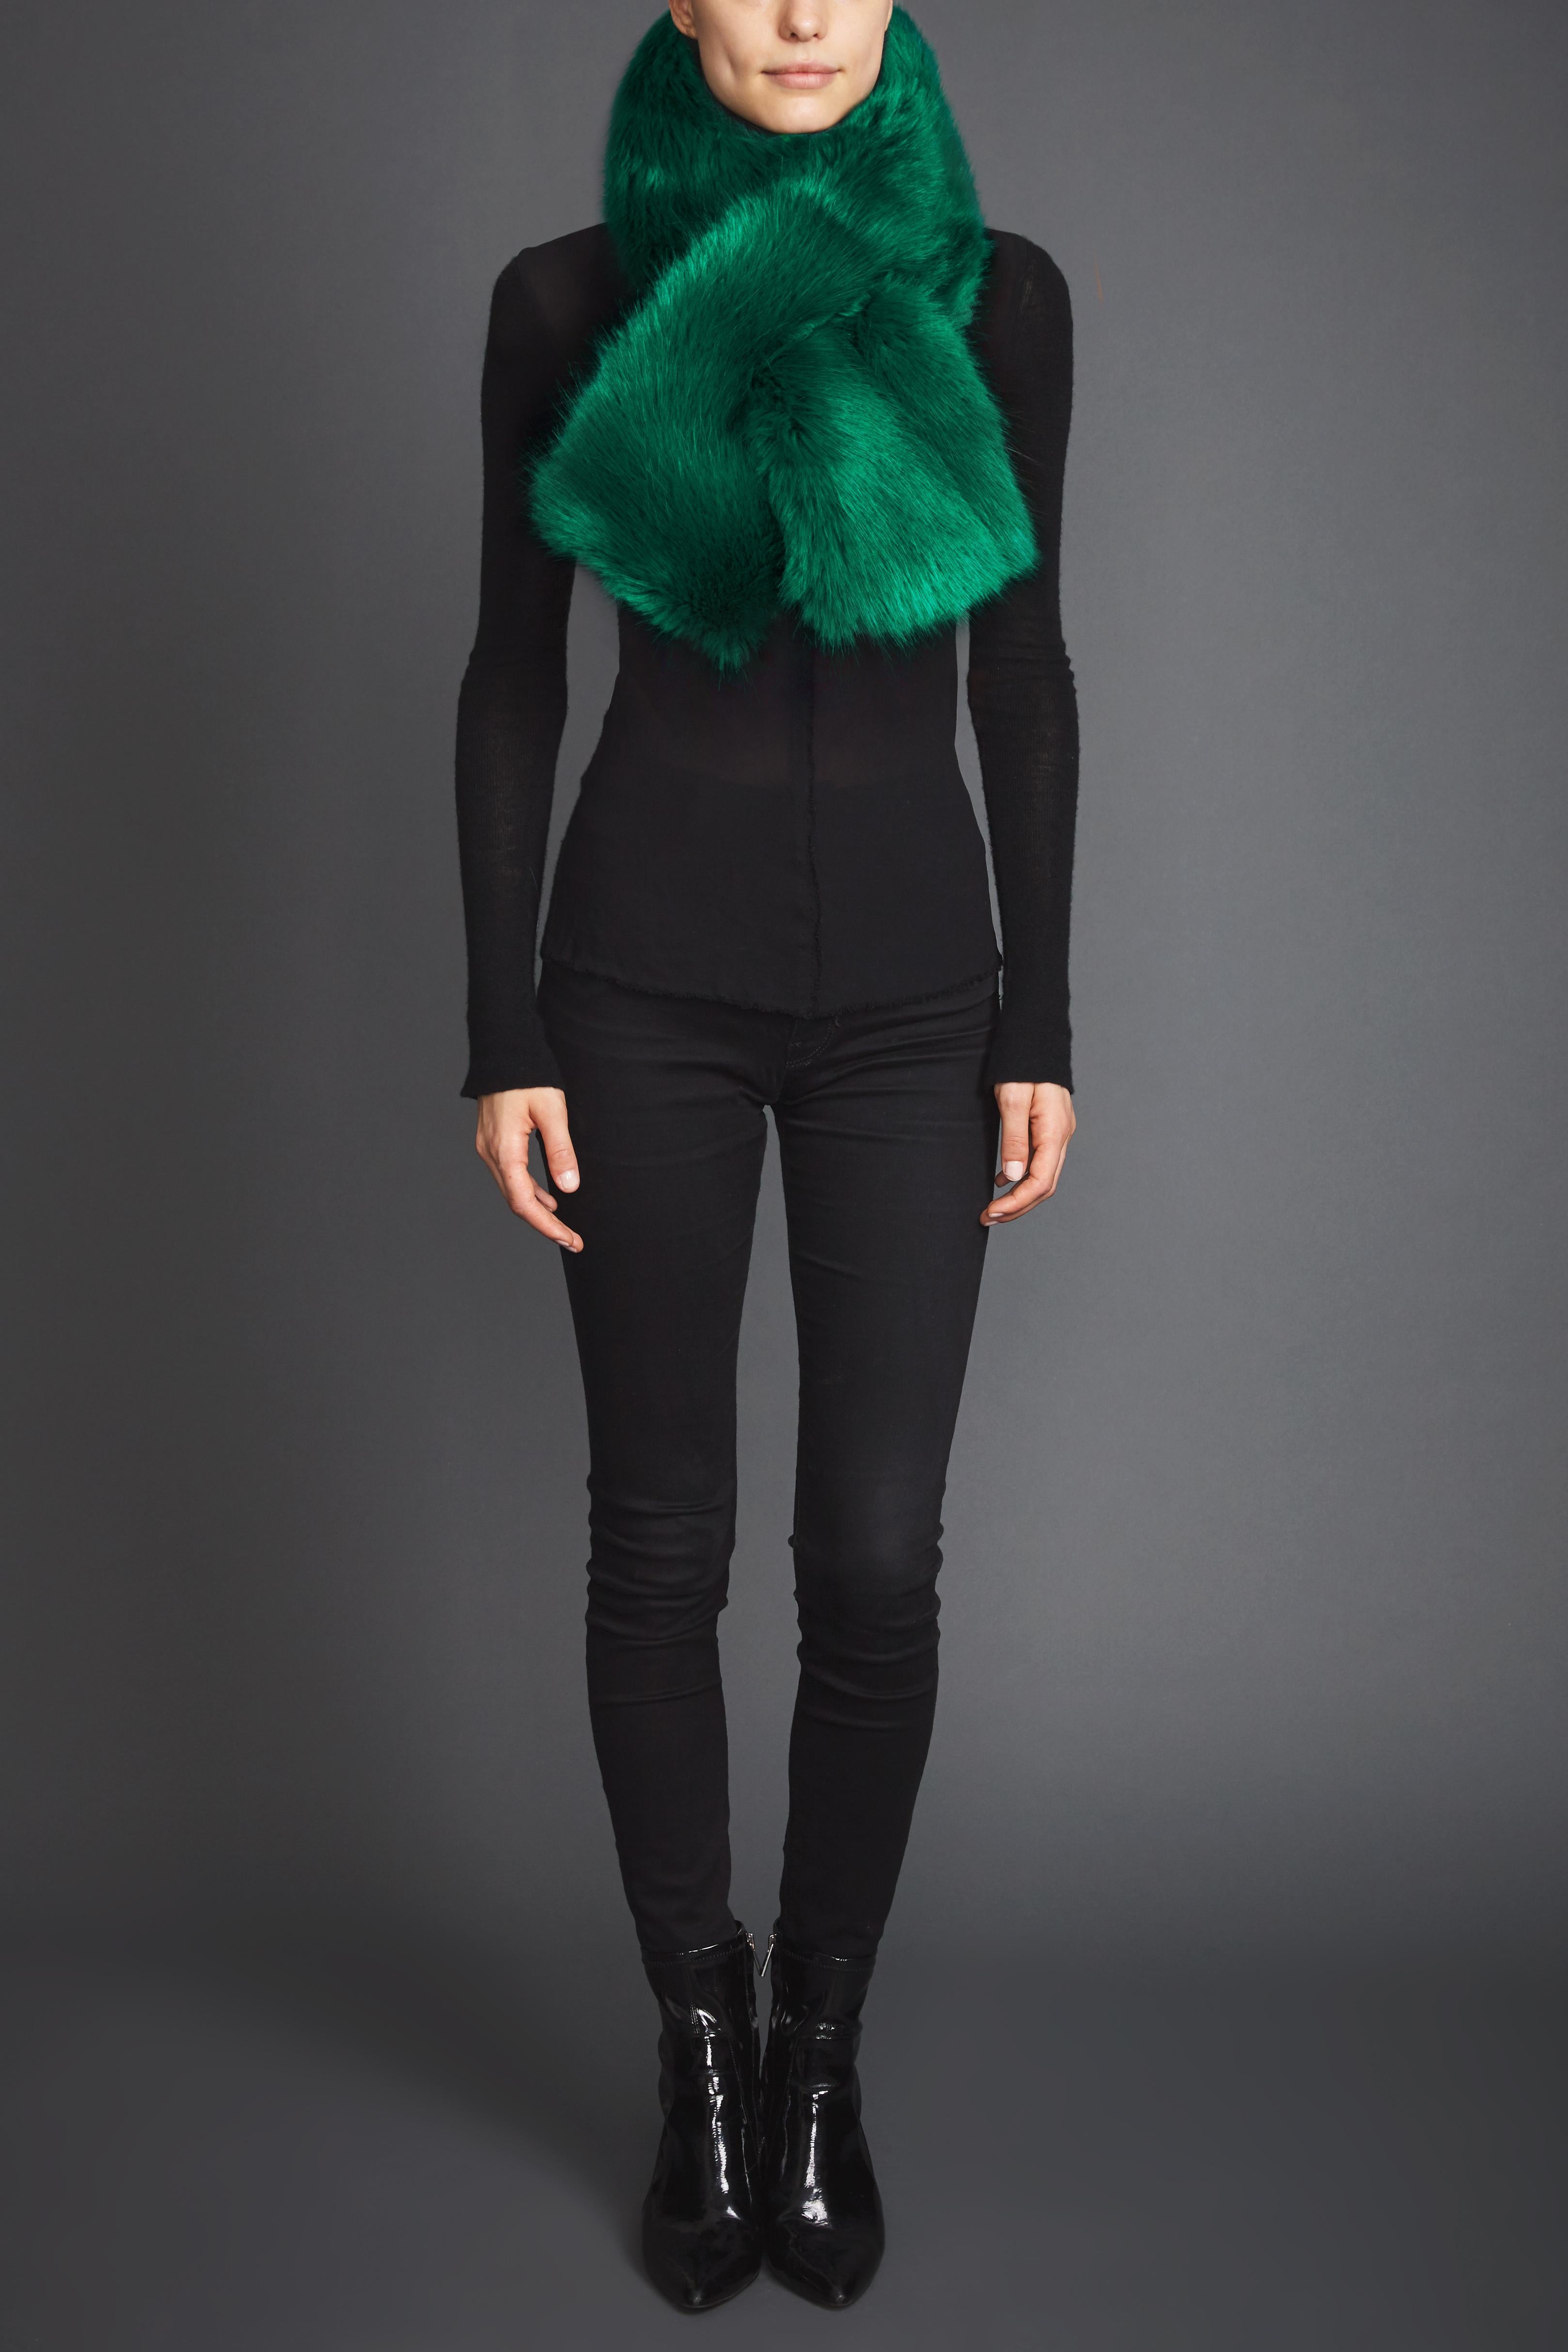 Cross-through Faux Fur Collar in Emerald Green

Details and Care:
Colour: Emerald Green
Luxurious Faux Fur
lined in 100% Acetate Satin
Special dry clean

Size and Fit:
Size fits all
Ties with hook and eyes